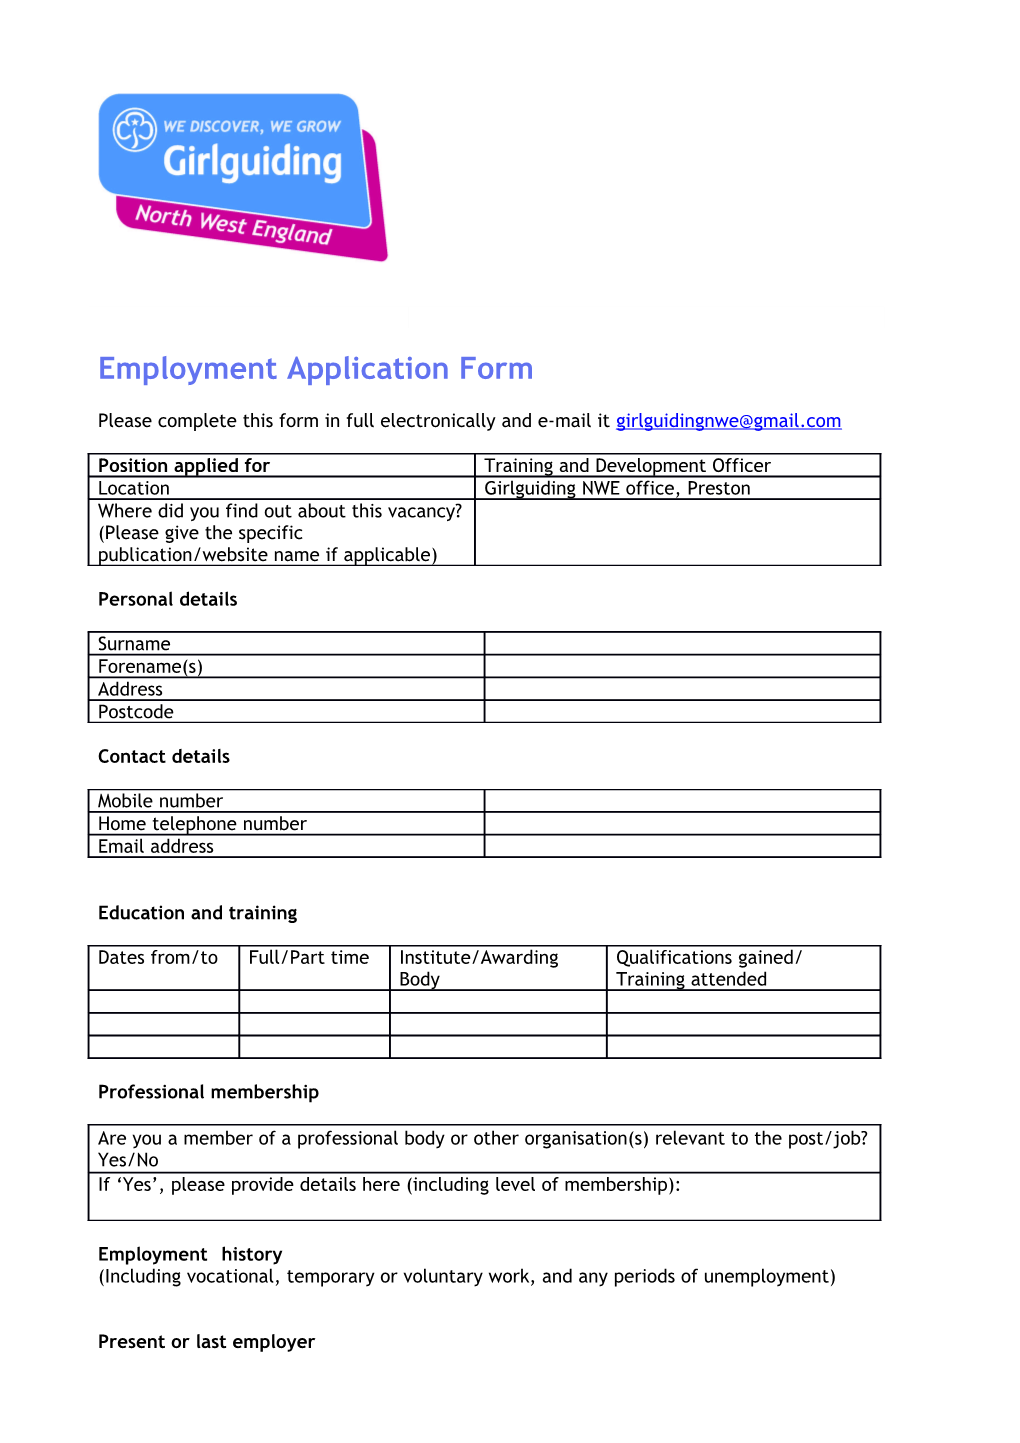 Please Complete This Form in Full Electronically and E-Mail